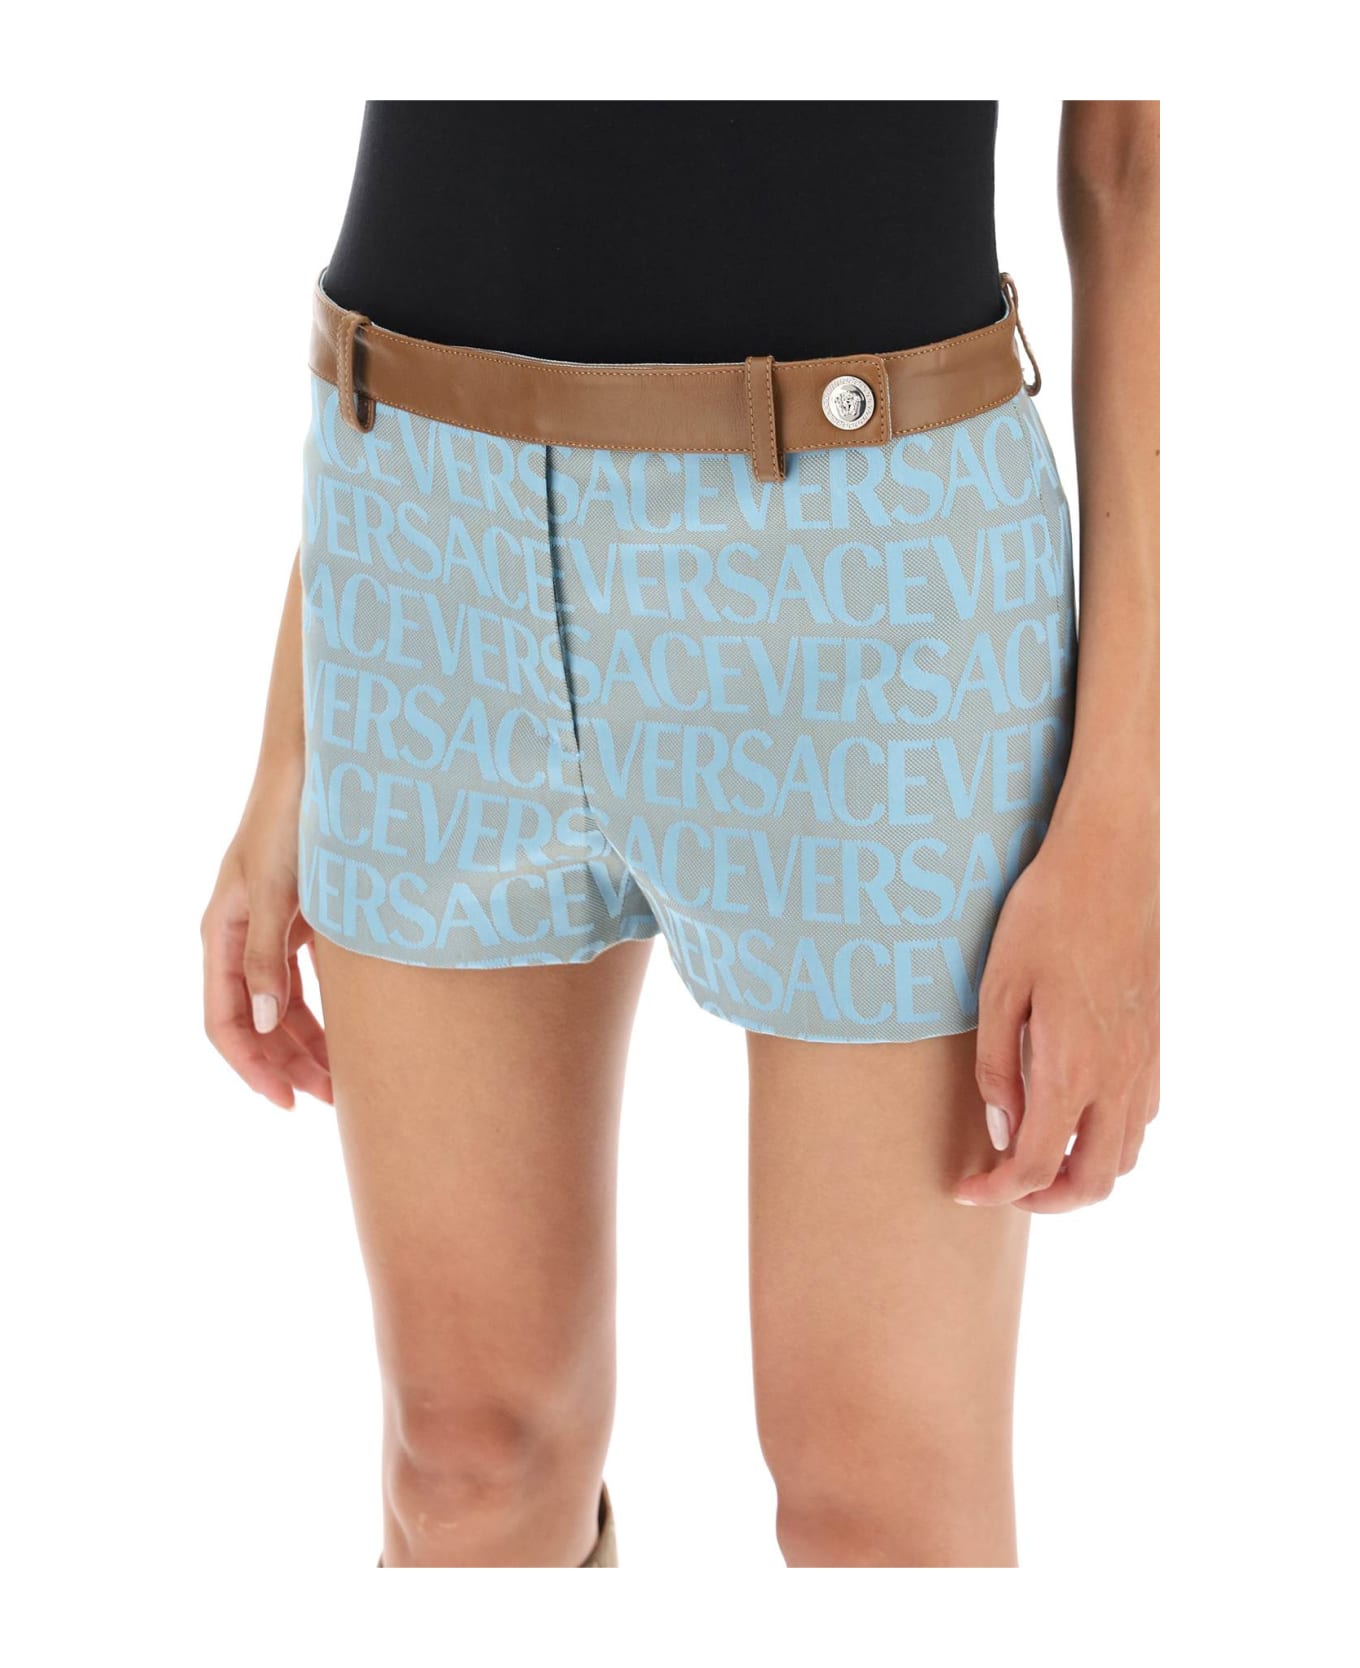 Versace Monogram Shorts With Leather Band - PALE BLUE BEIGE (Light blue)